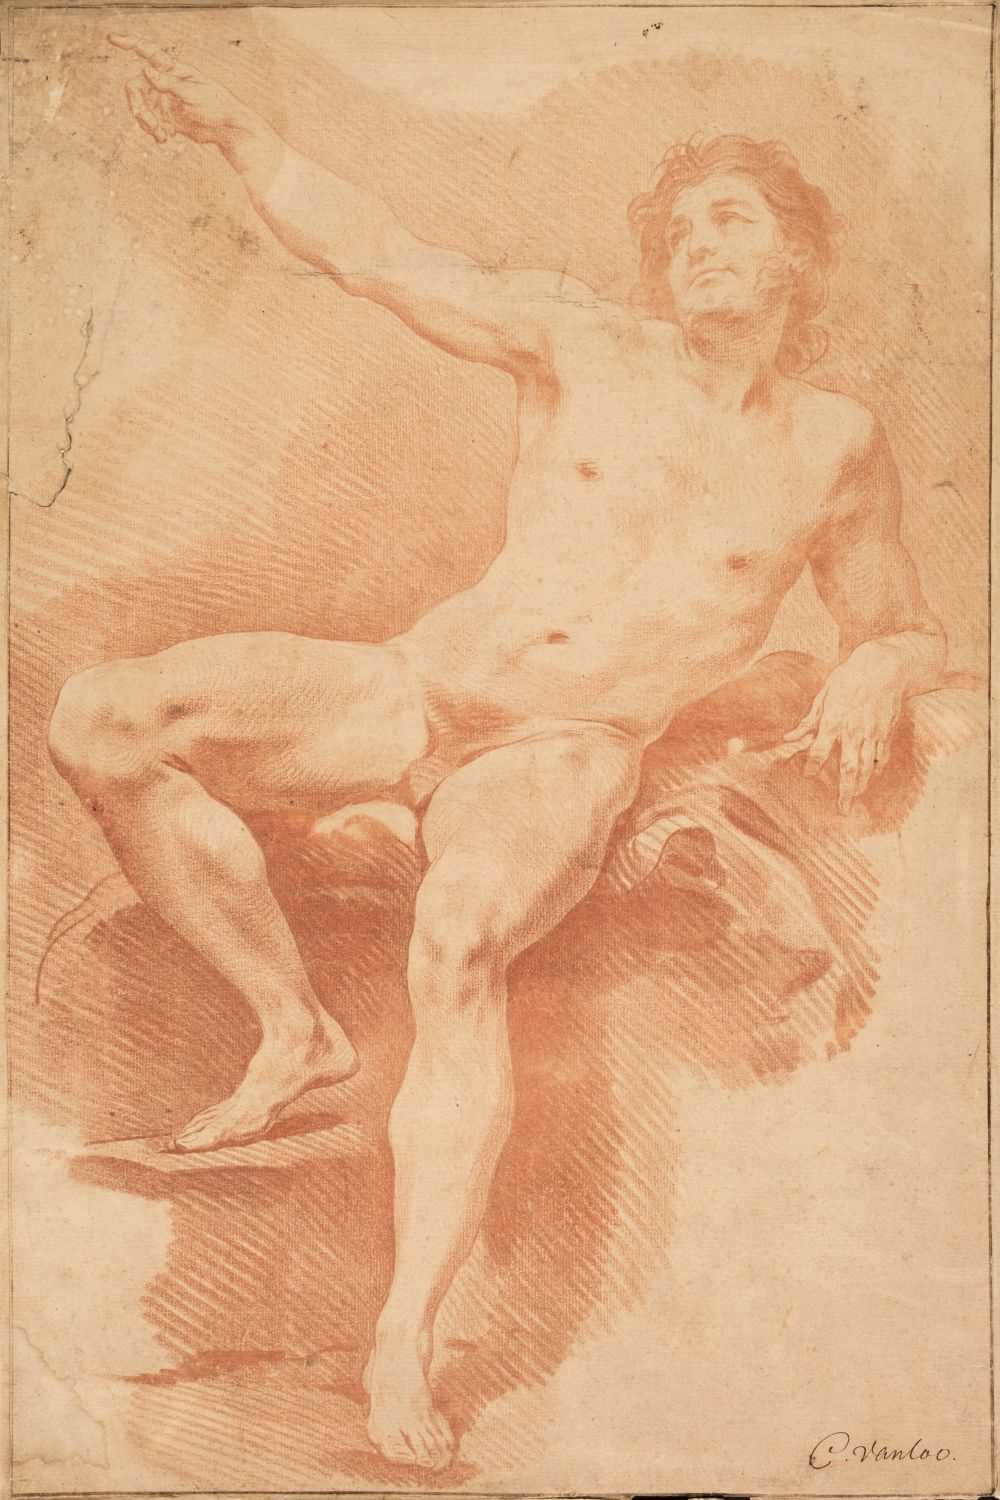 Lot 31 - Van Loo (Carle, 1705-1765). Academy study: Reclining male nude with raised arm